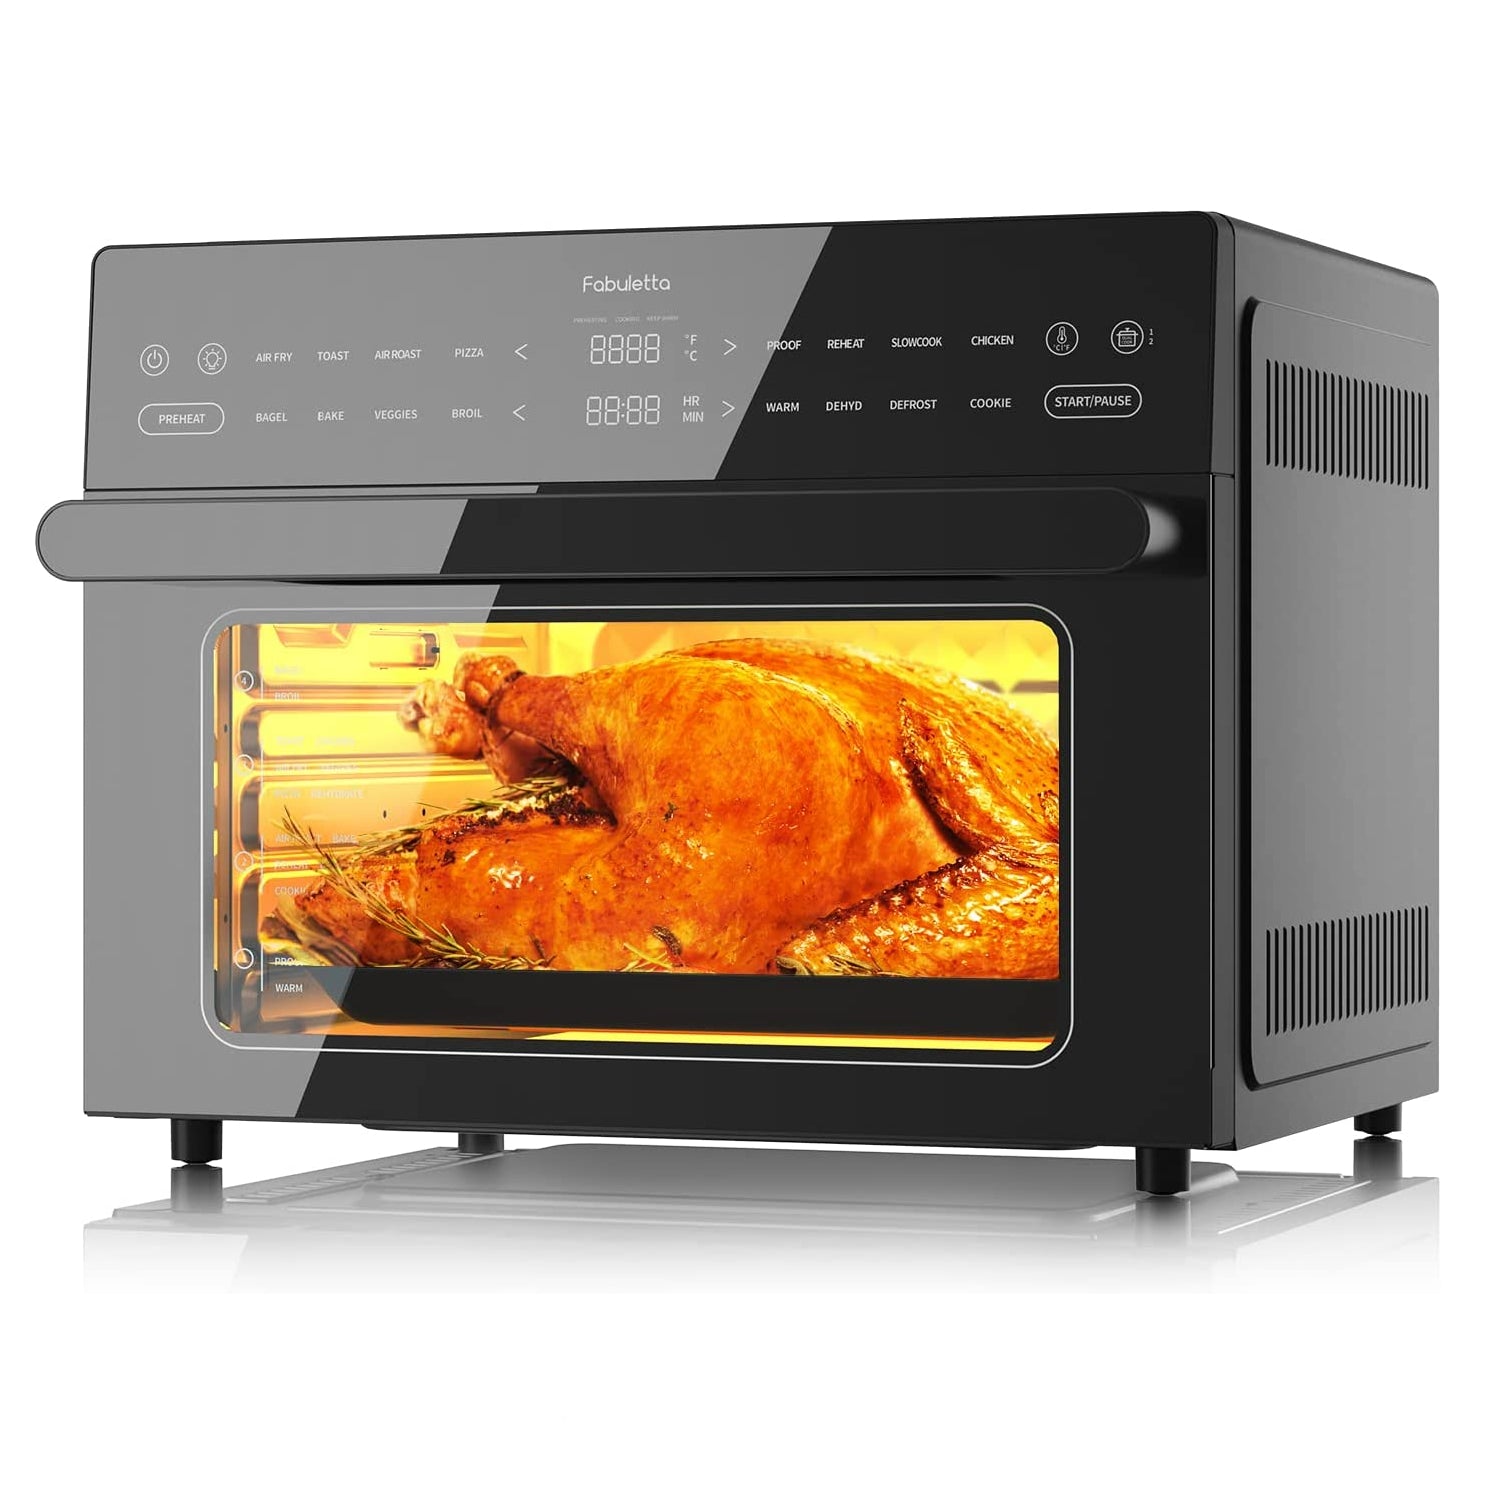 Toaster Ovens for sale in Savannah, Cayman Islands